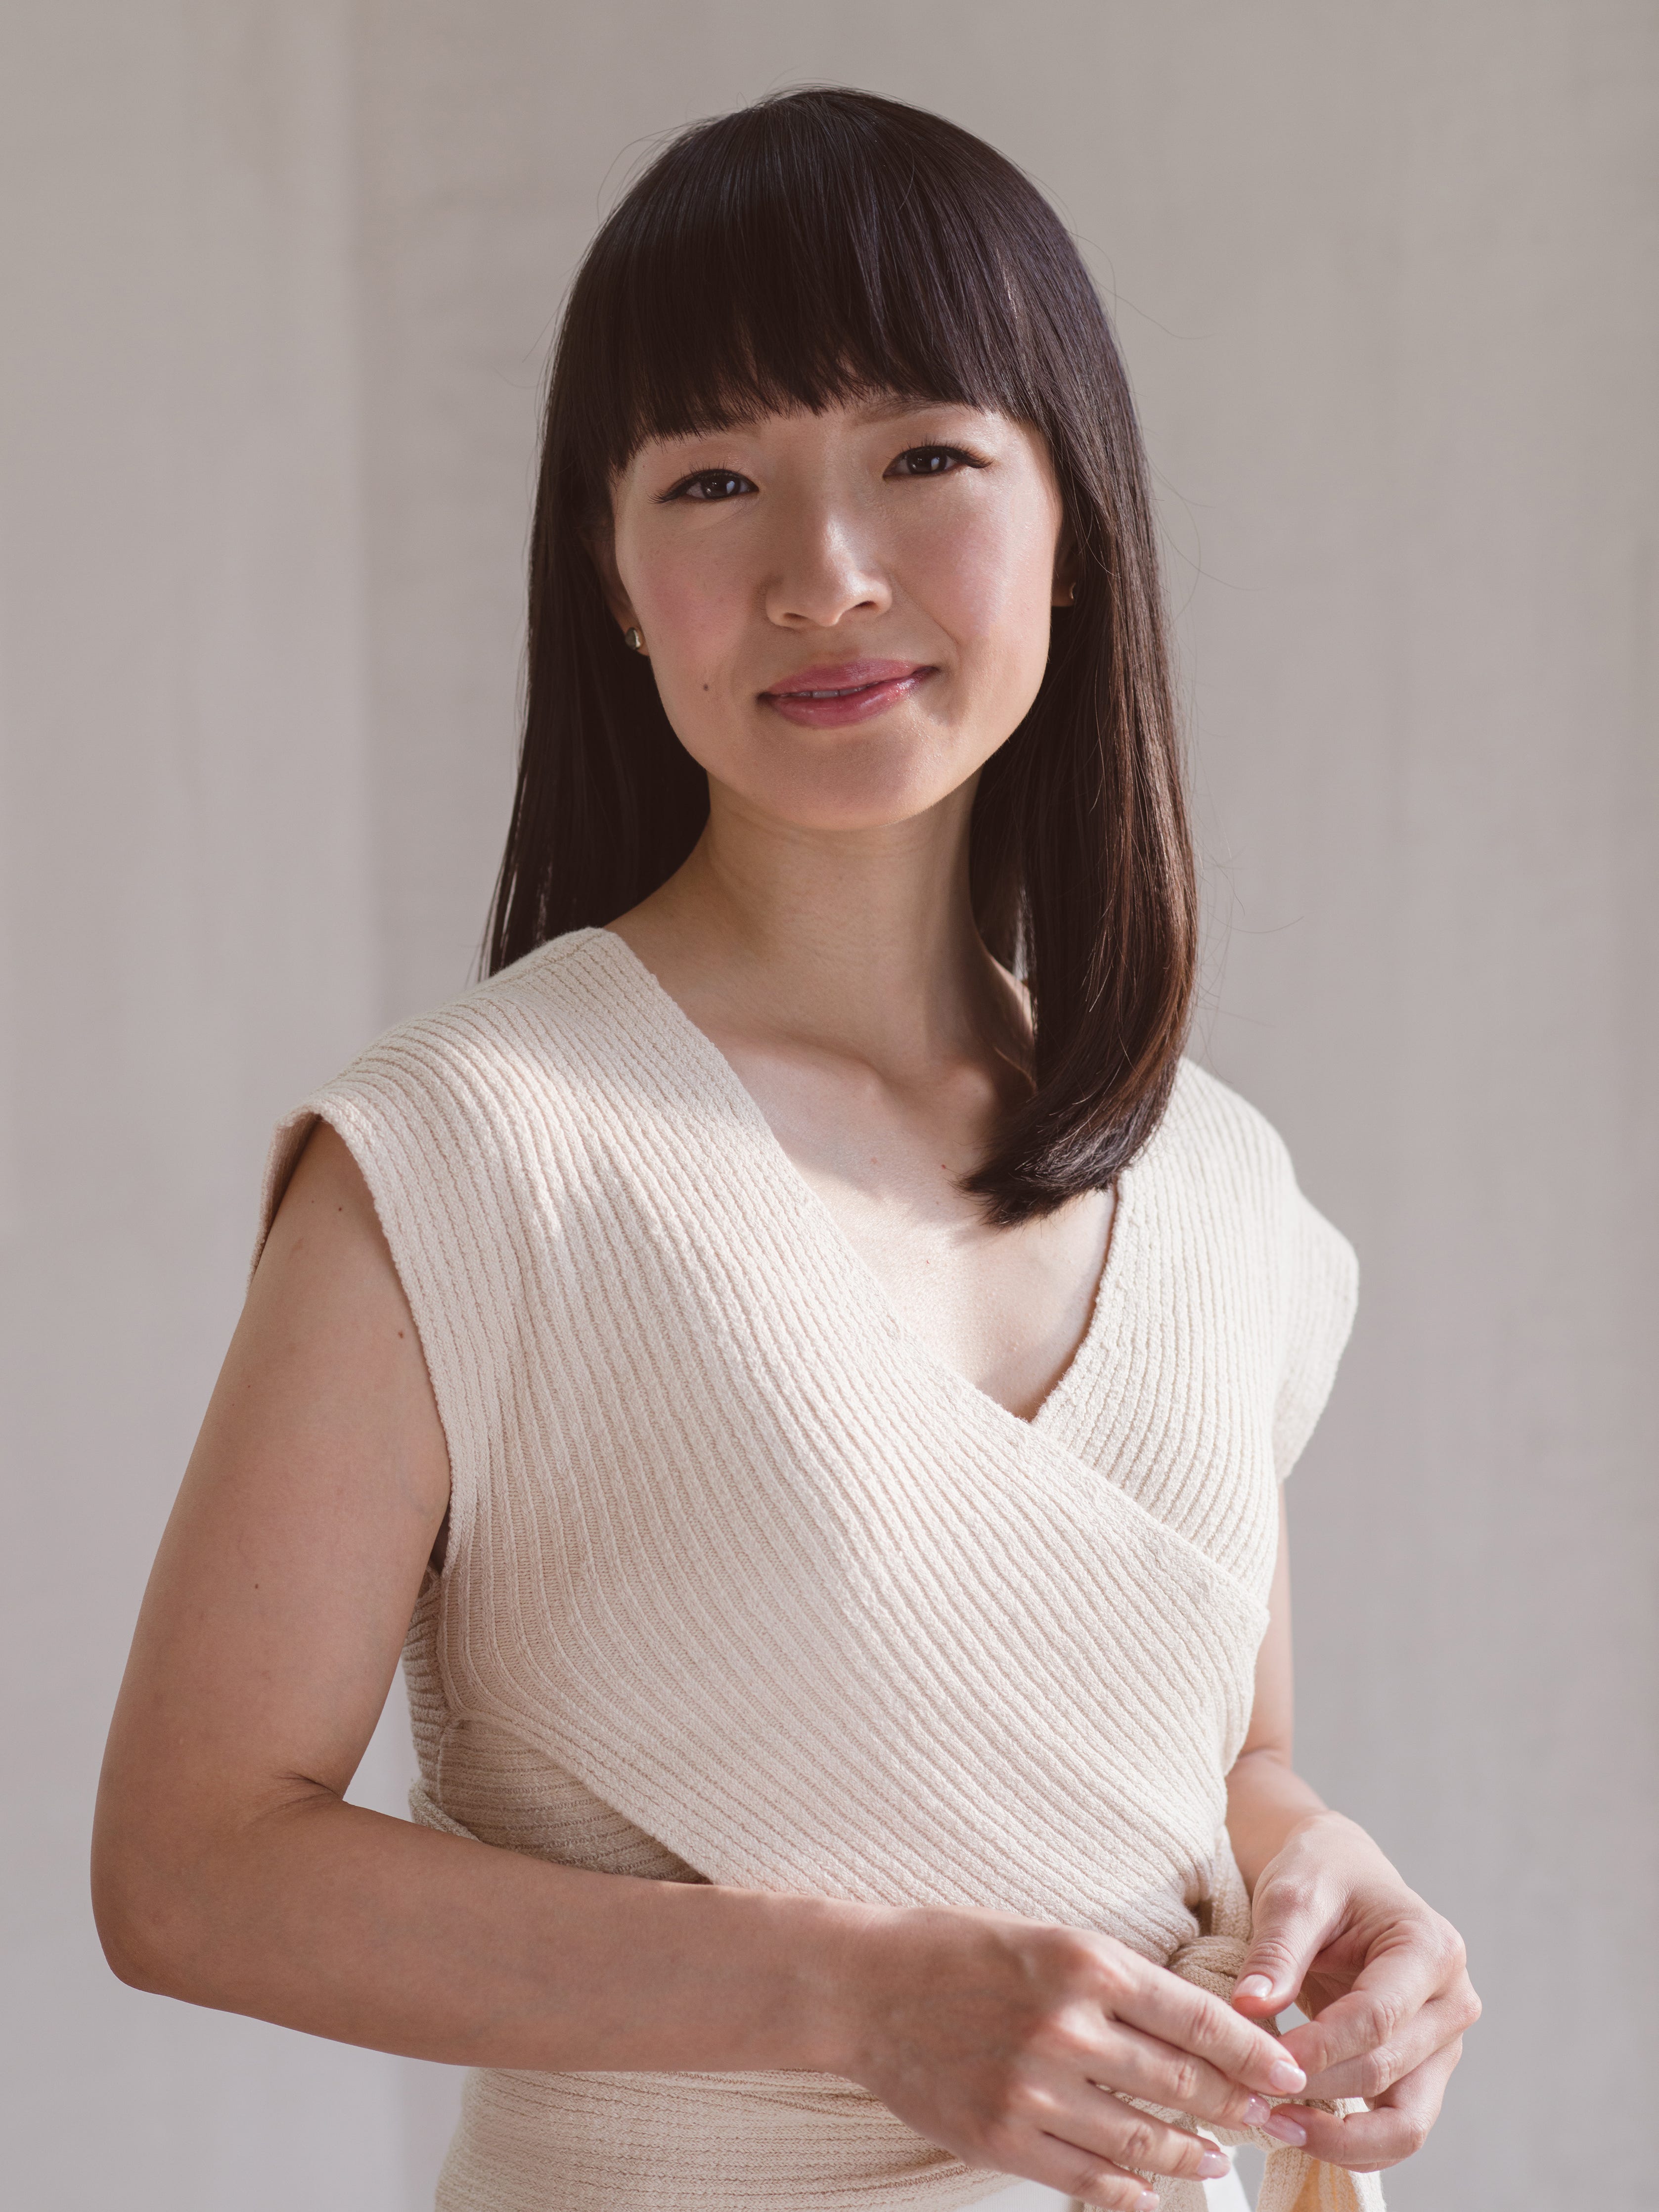 Marie Kondo's house is messy. Should you give up on being tidy too?